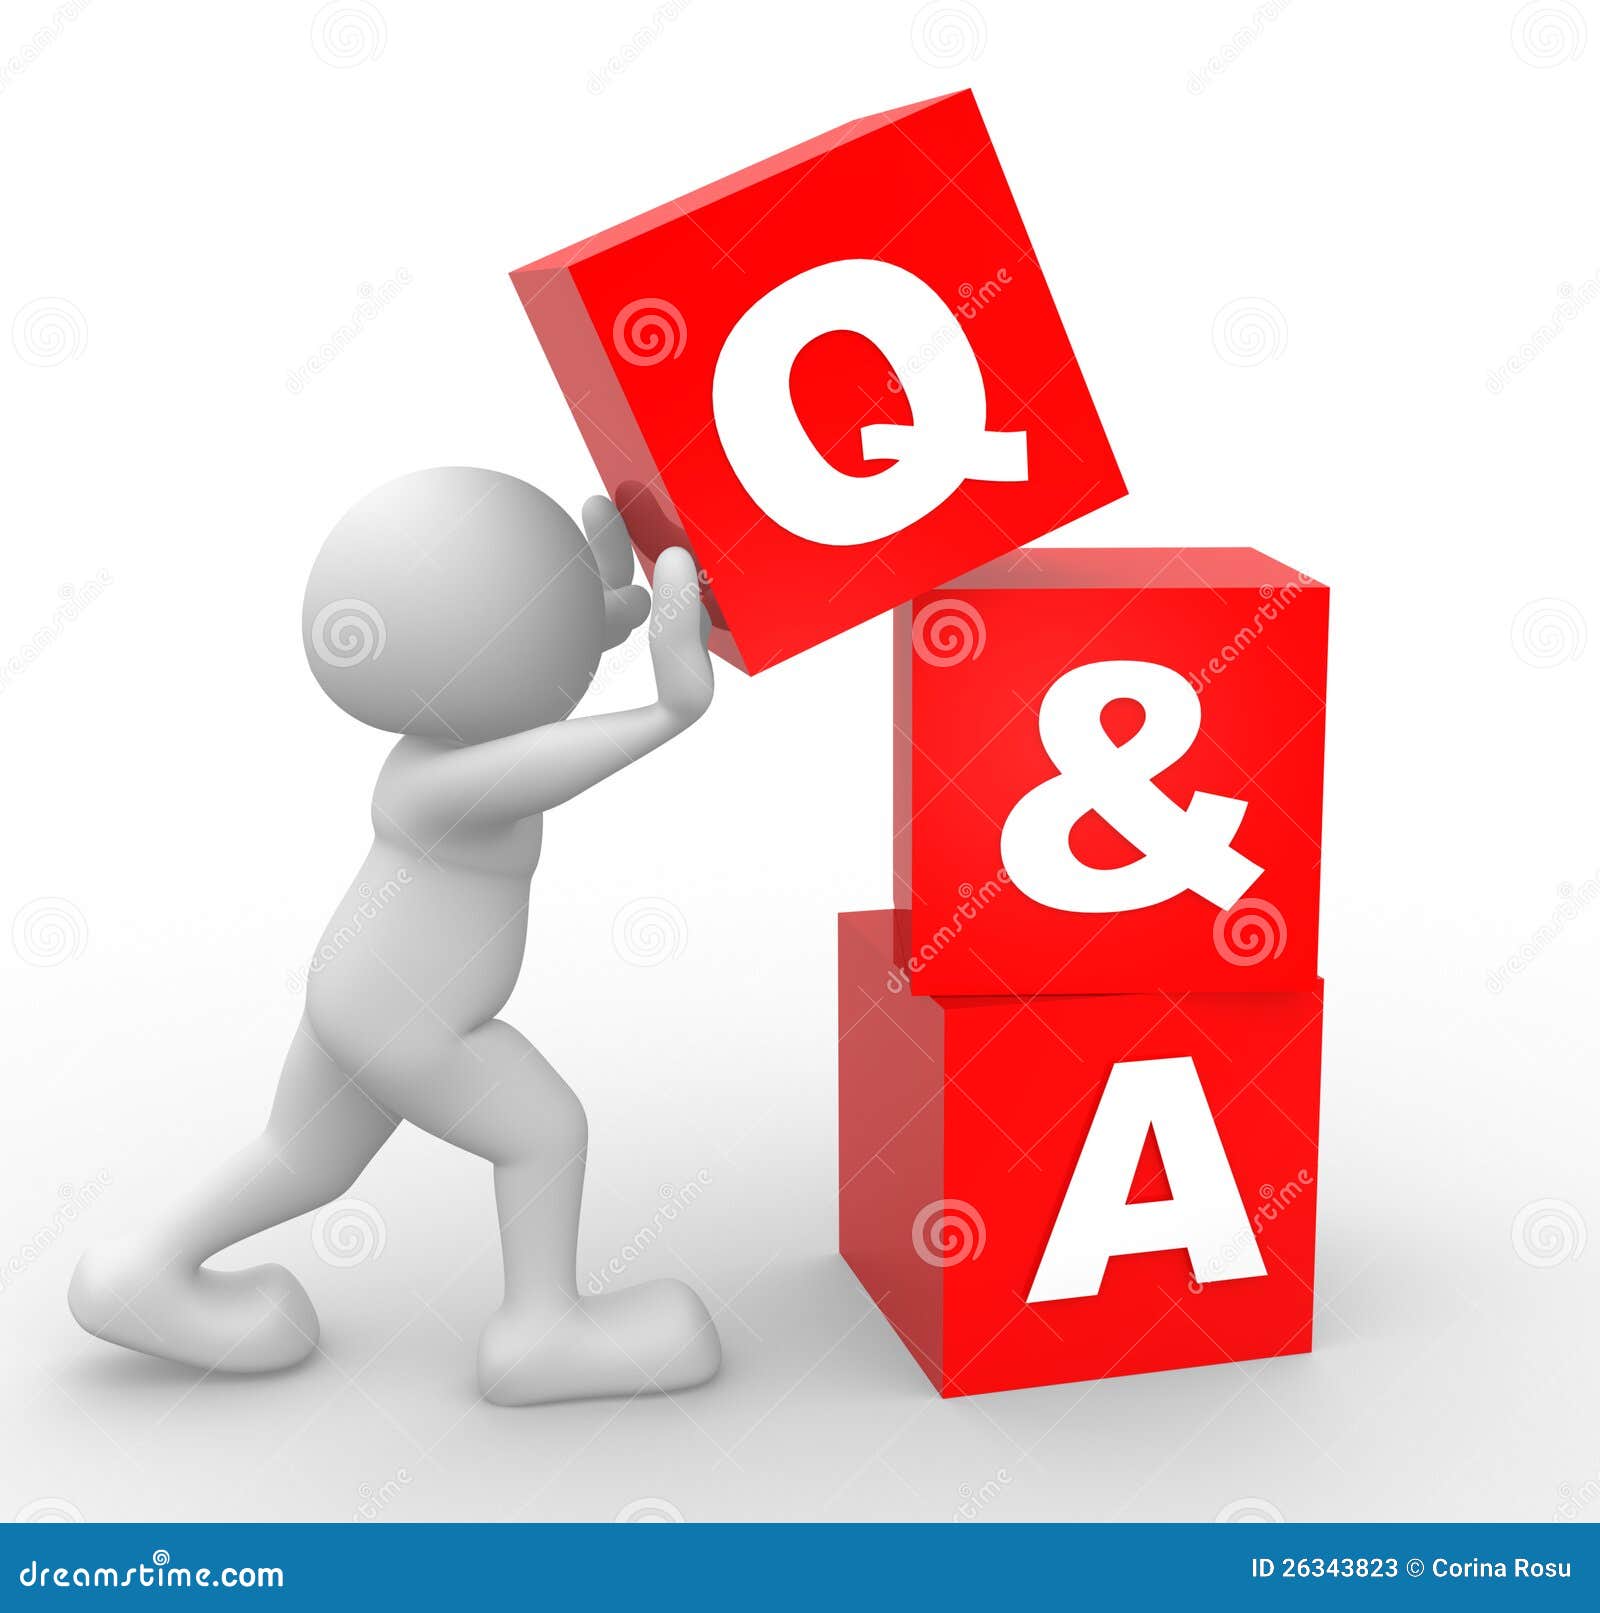 question and answer clipart - photo #46